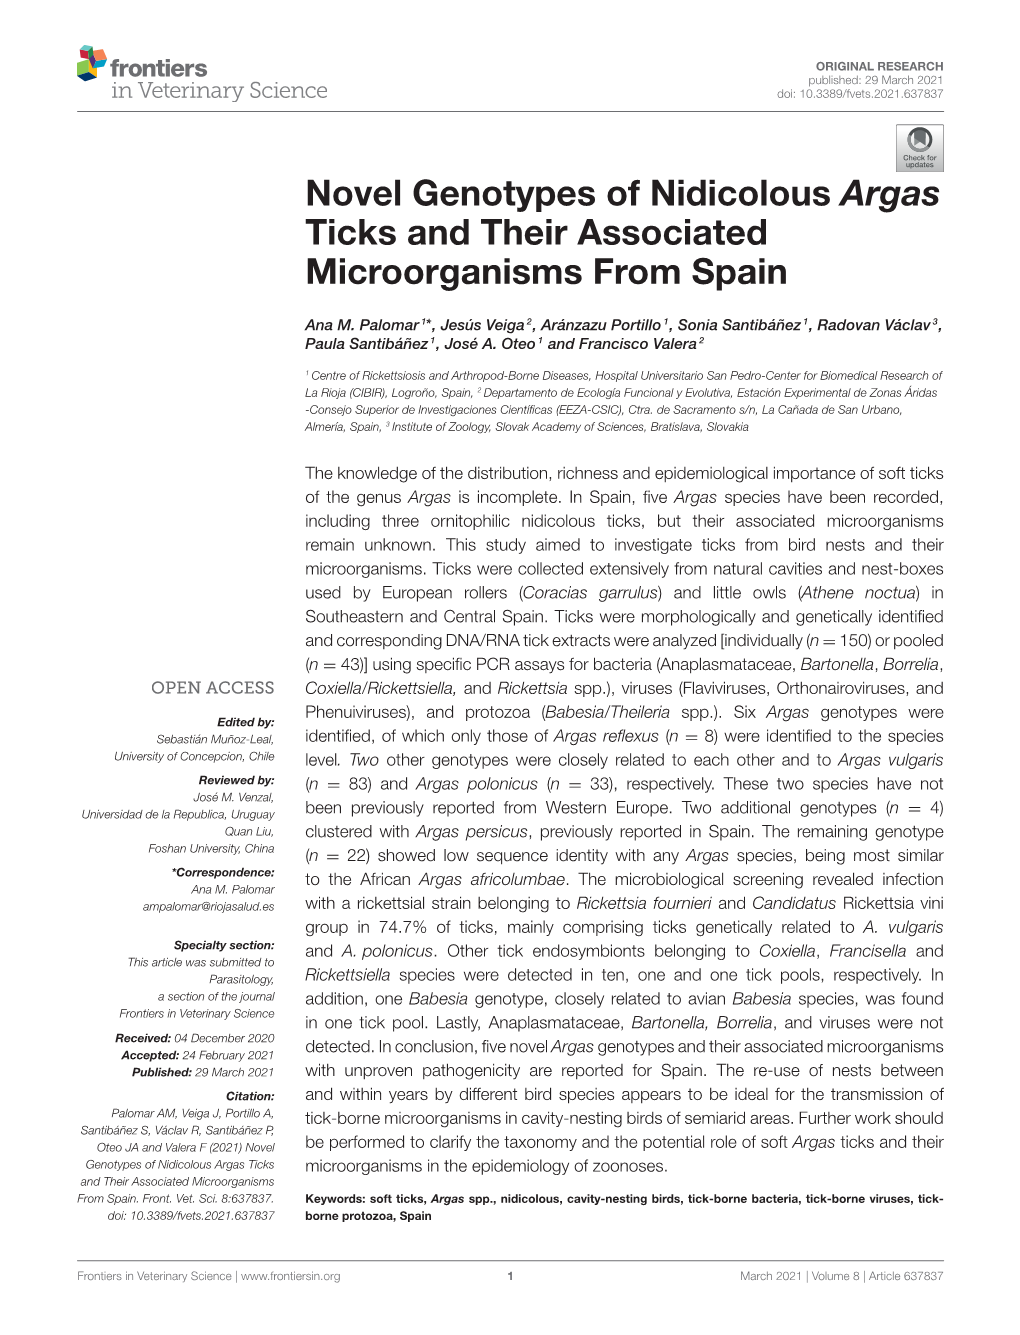 Novel Genotypes of Nidicolous Argas Ticks and Their Associated Microorganisms from Spain